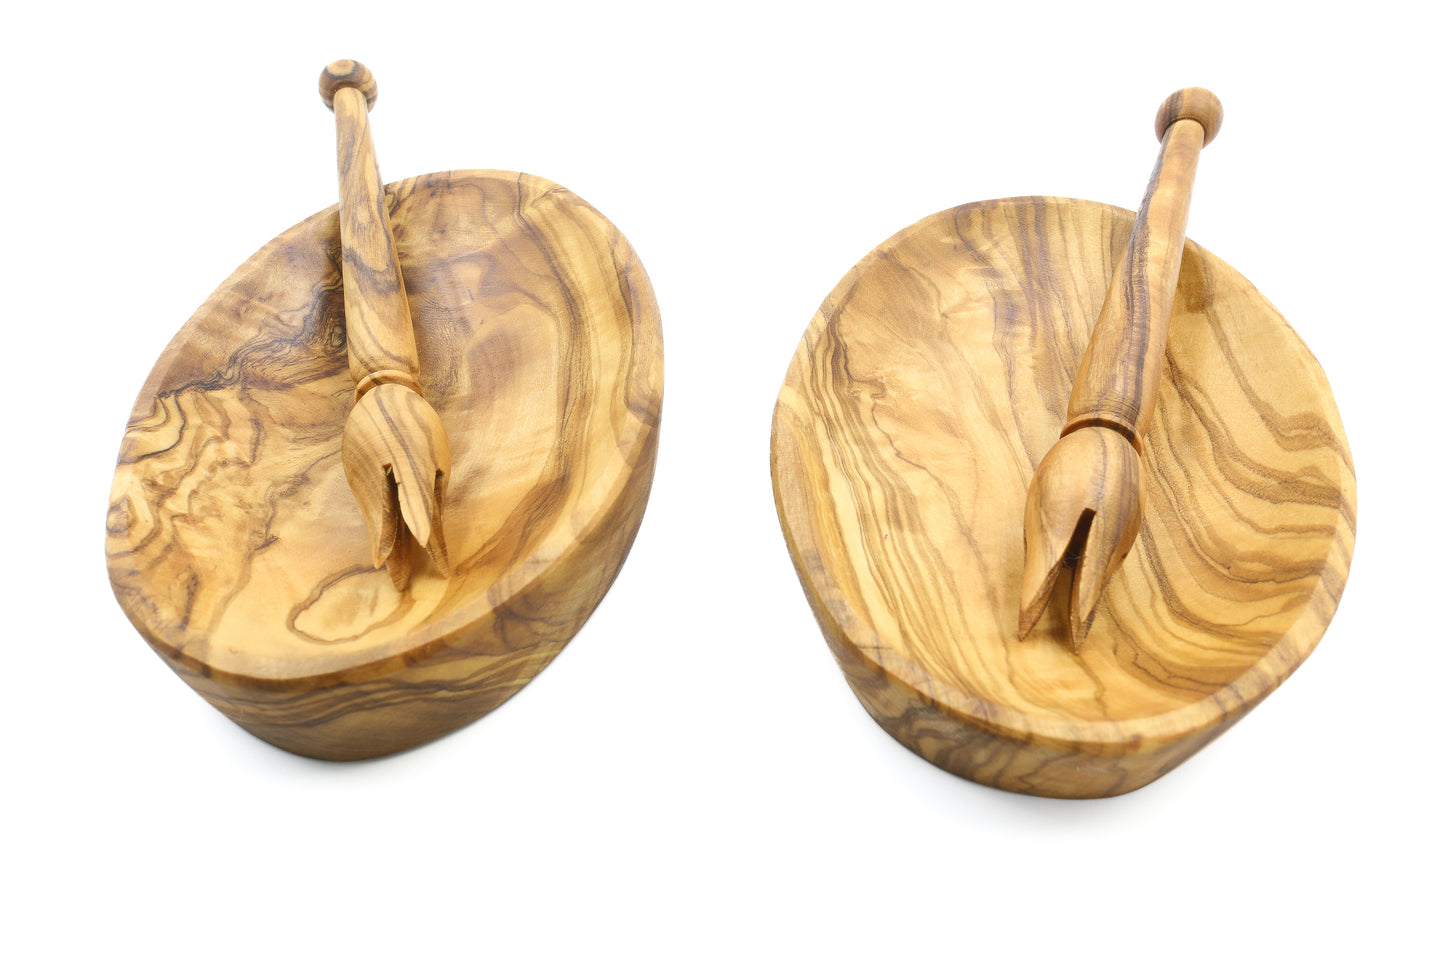 Oval olive wood bowl with a set of artisanal olive pickers